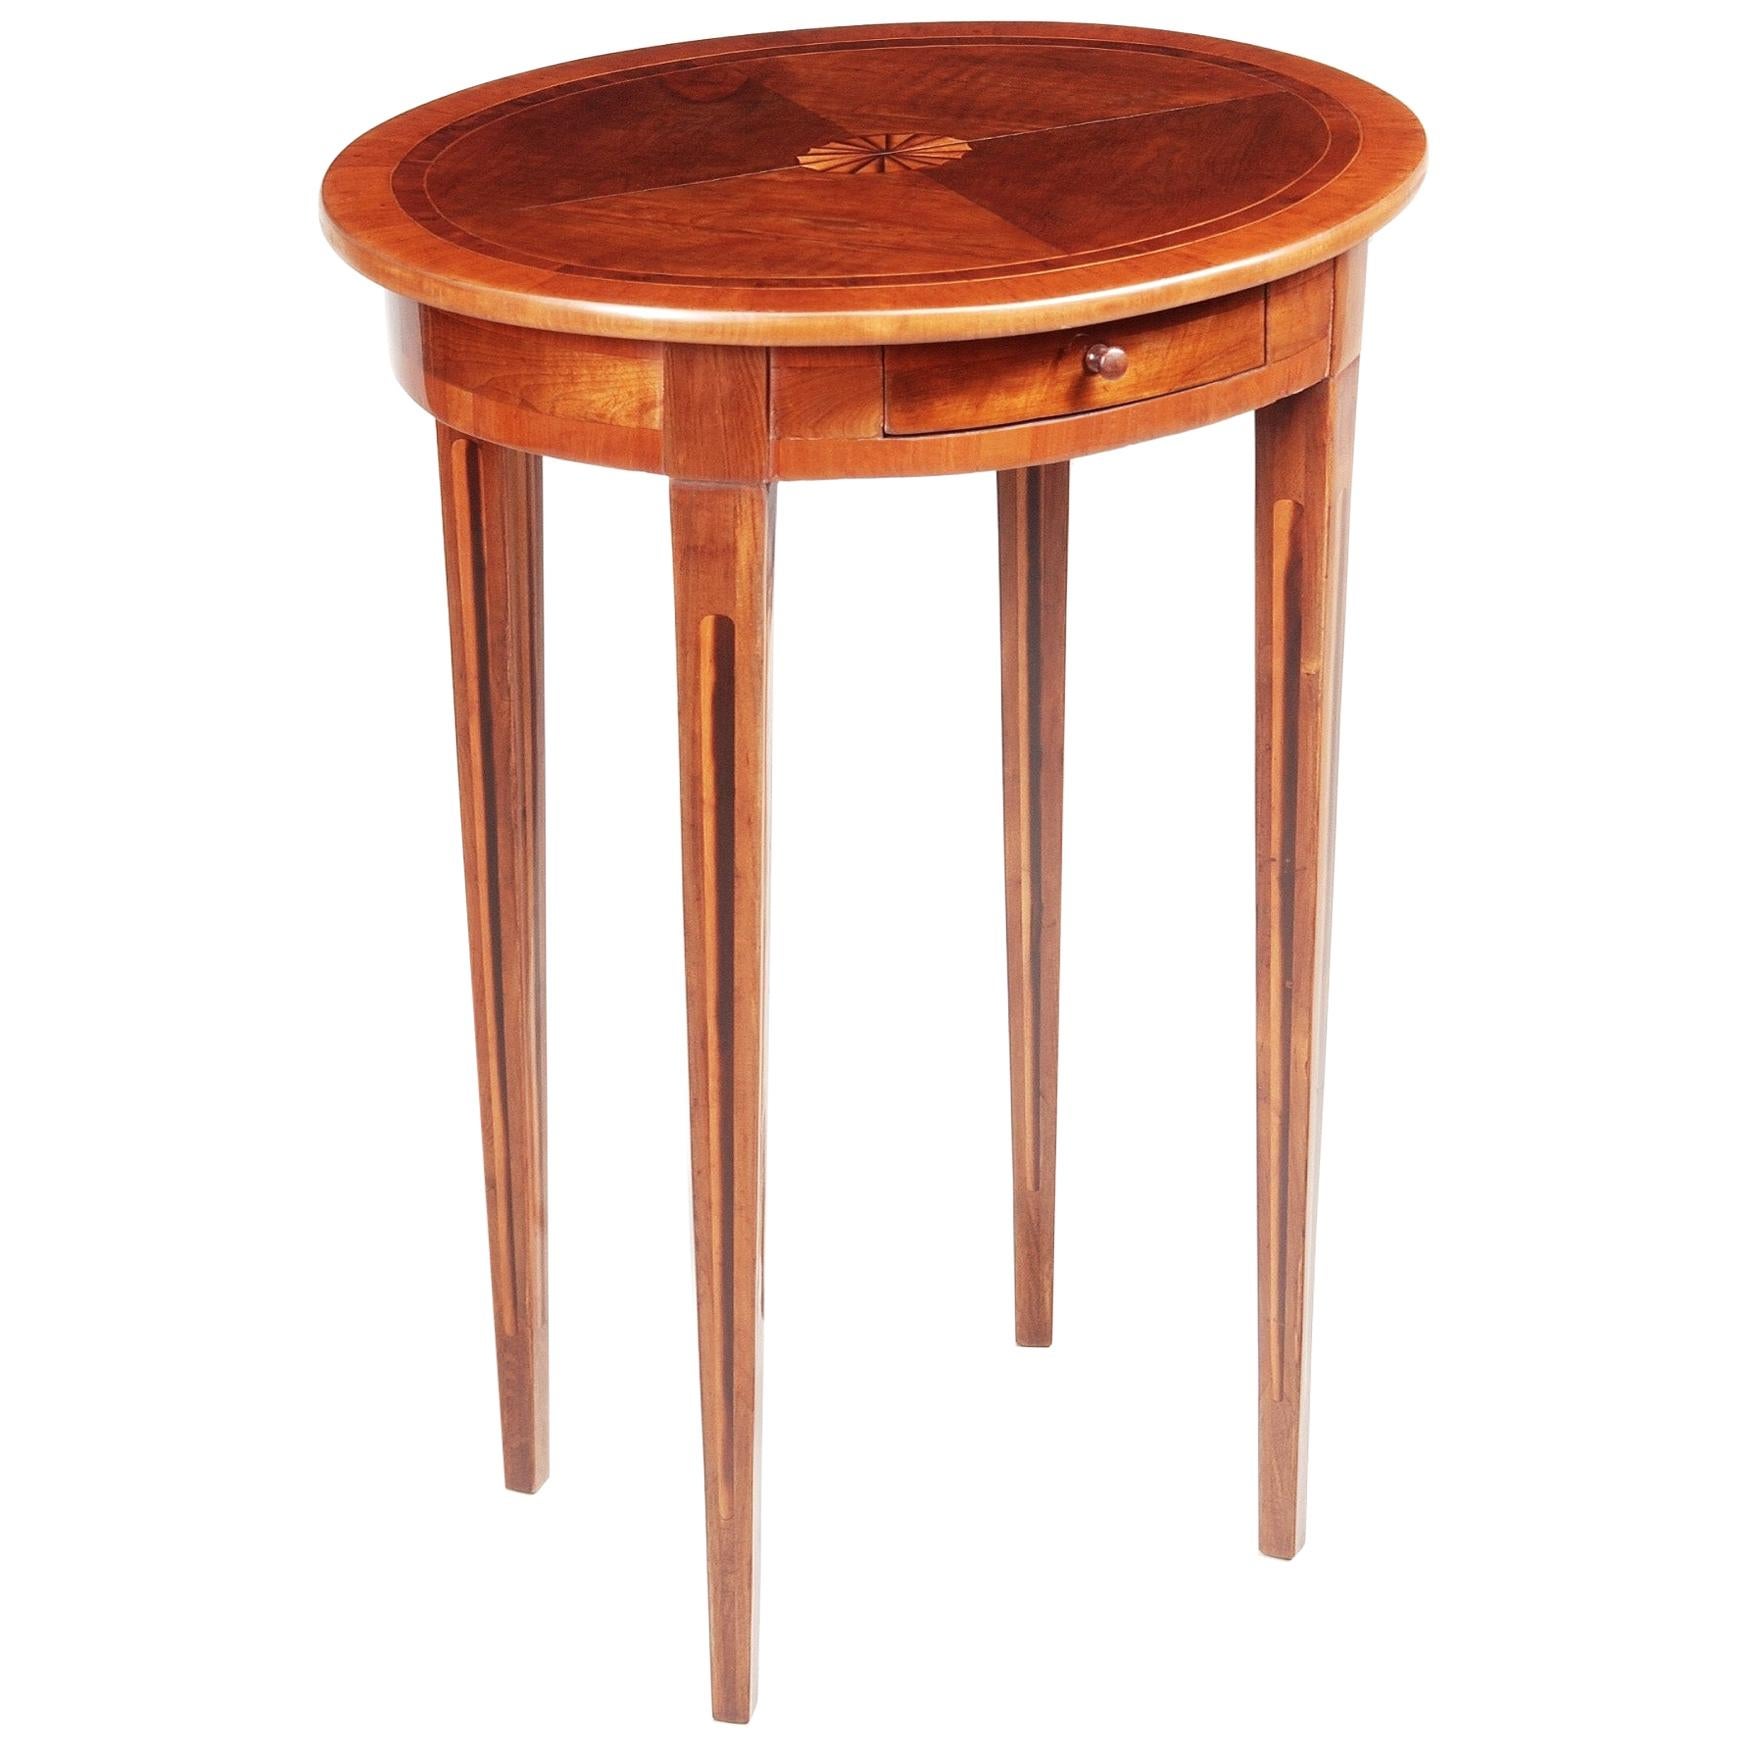 Small Brown Yew-Tree Classicism Inlaid Table, Italy, 1810s, Shellac Polished